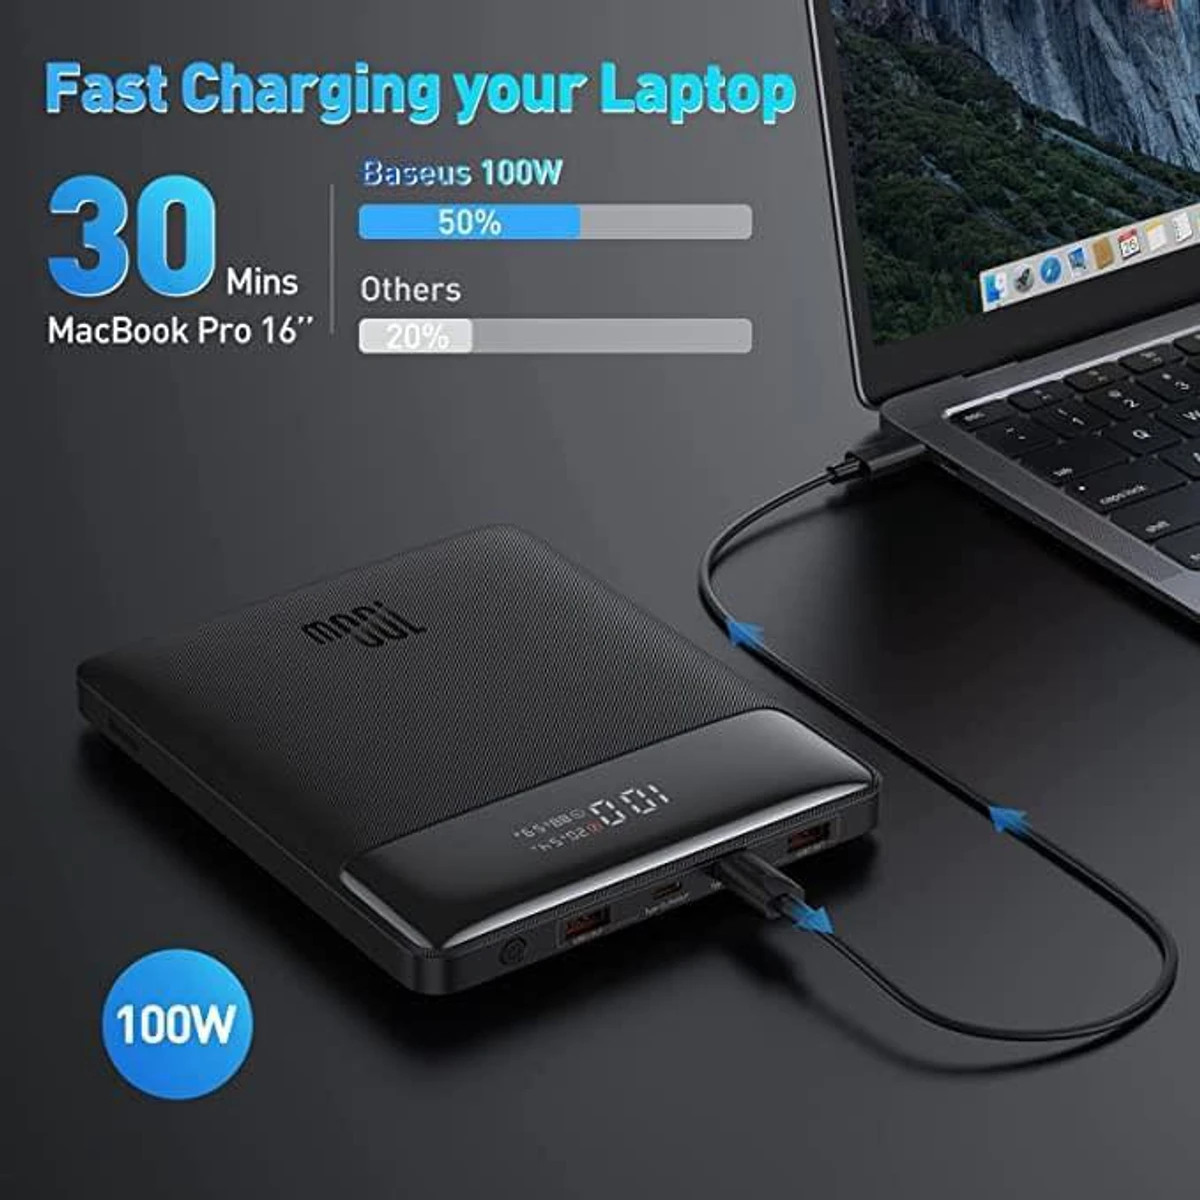 Fast charging laptop